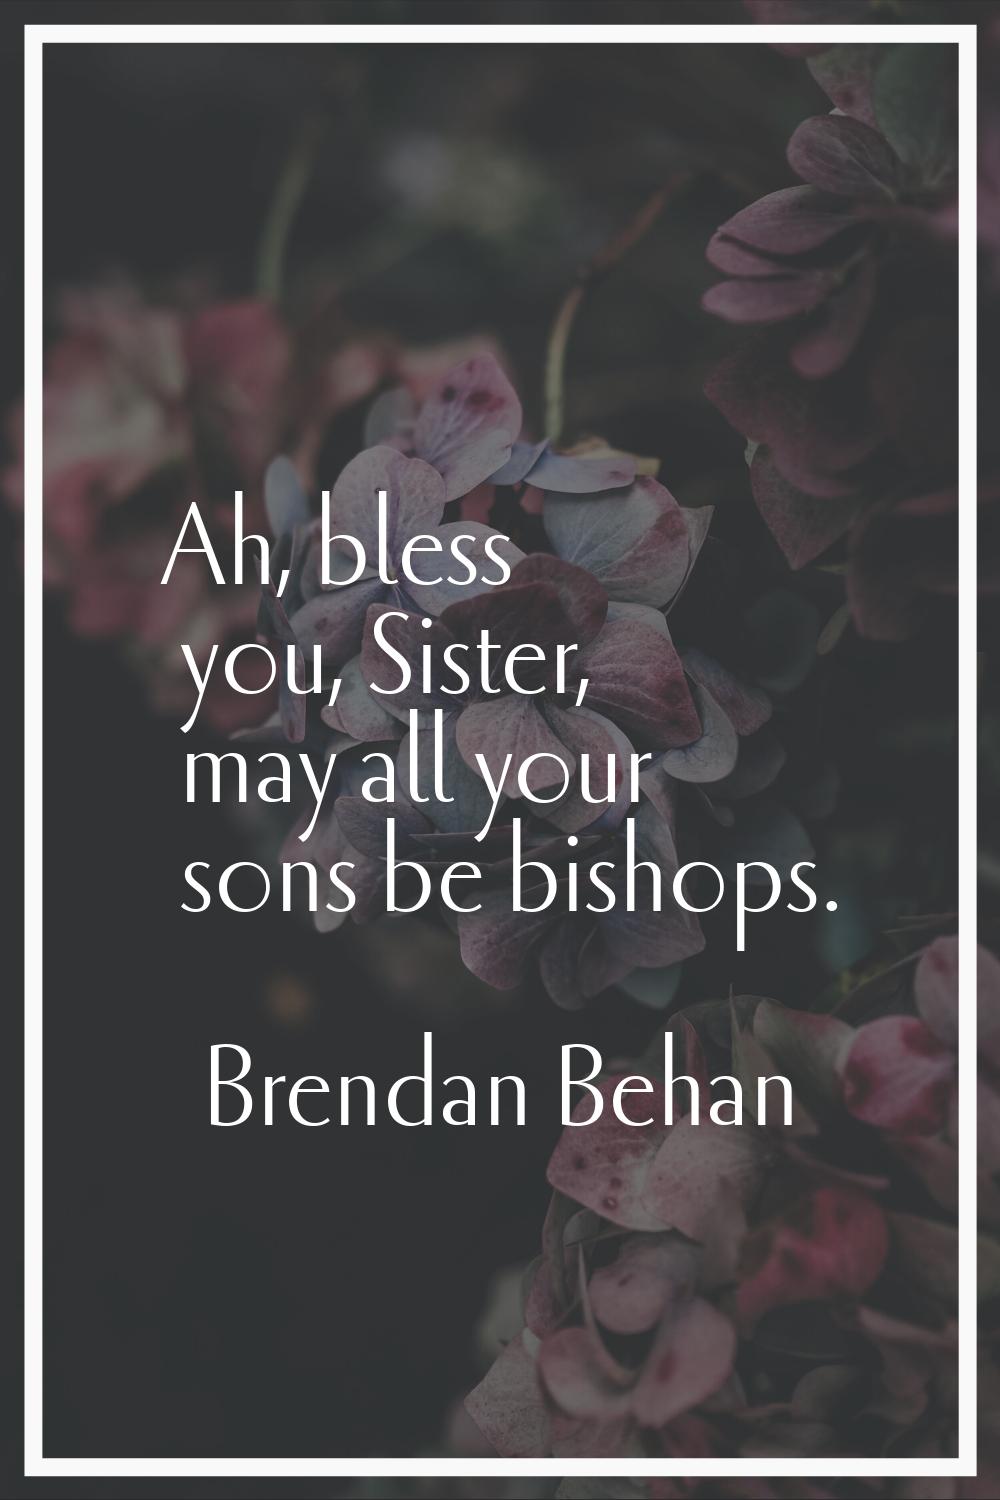 Ah, bless you, Sister, may all your sons be bishops.